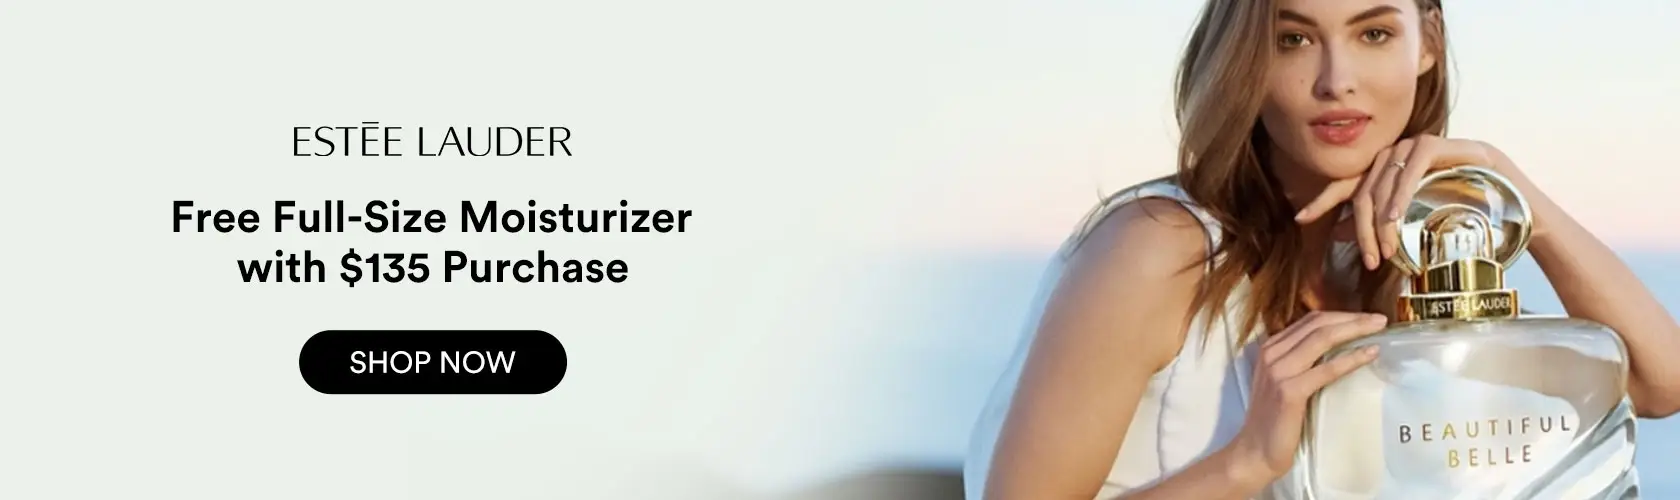 Estee Lauder: Free Full-Size Moisturizer with $135 Purchase